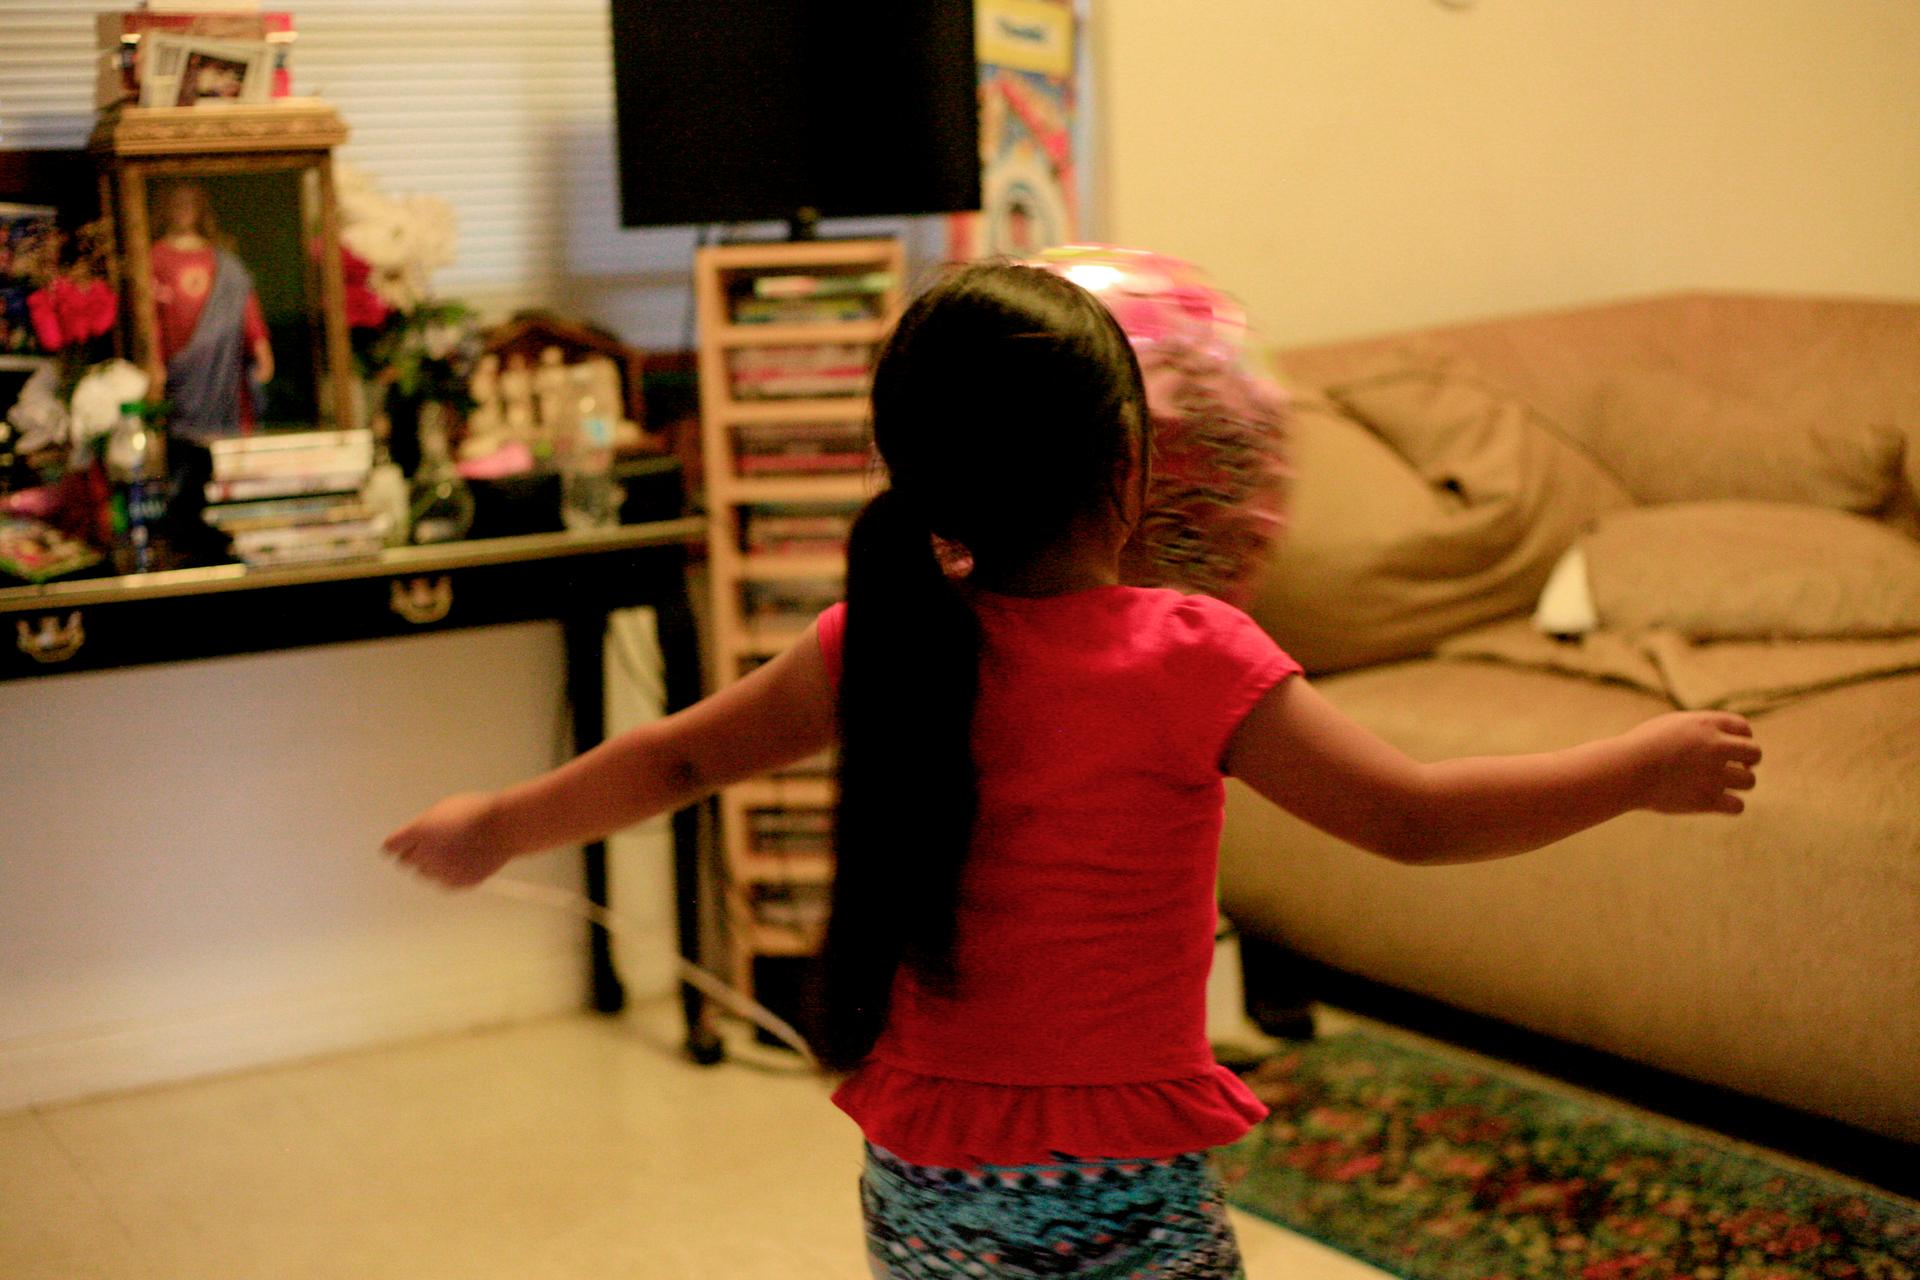 Young girl, shown from behind, with arms outstreched, in room in home